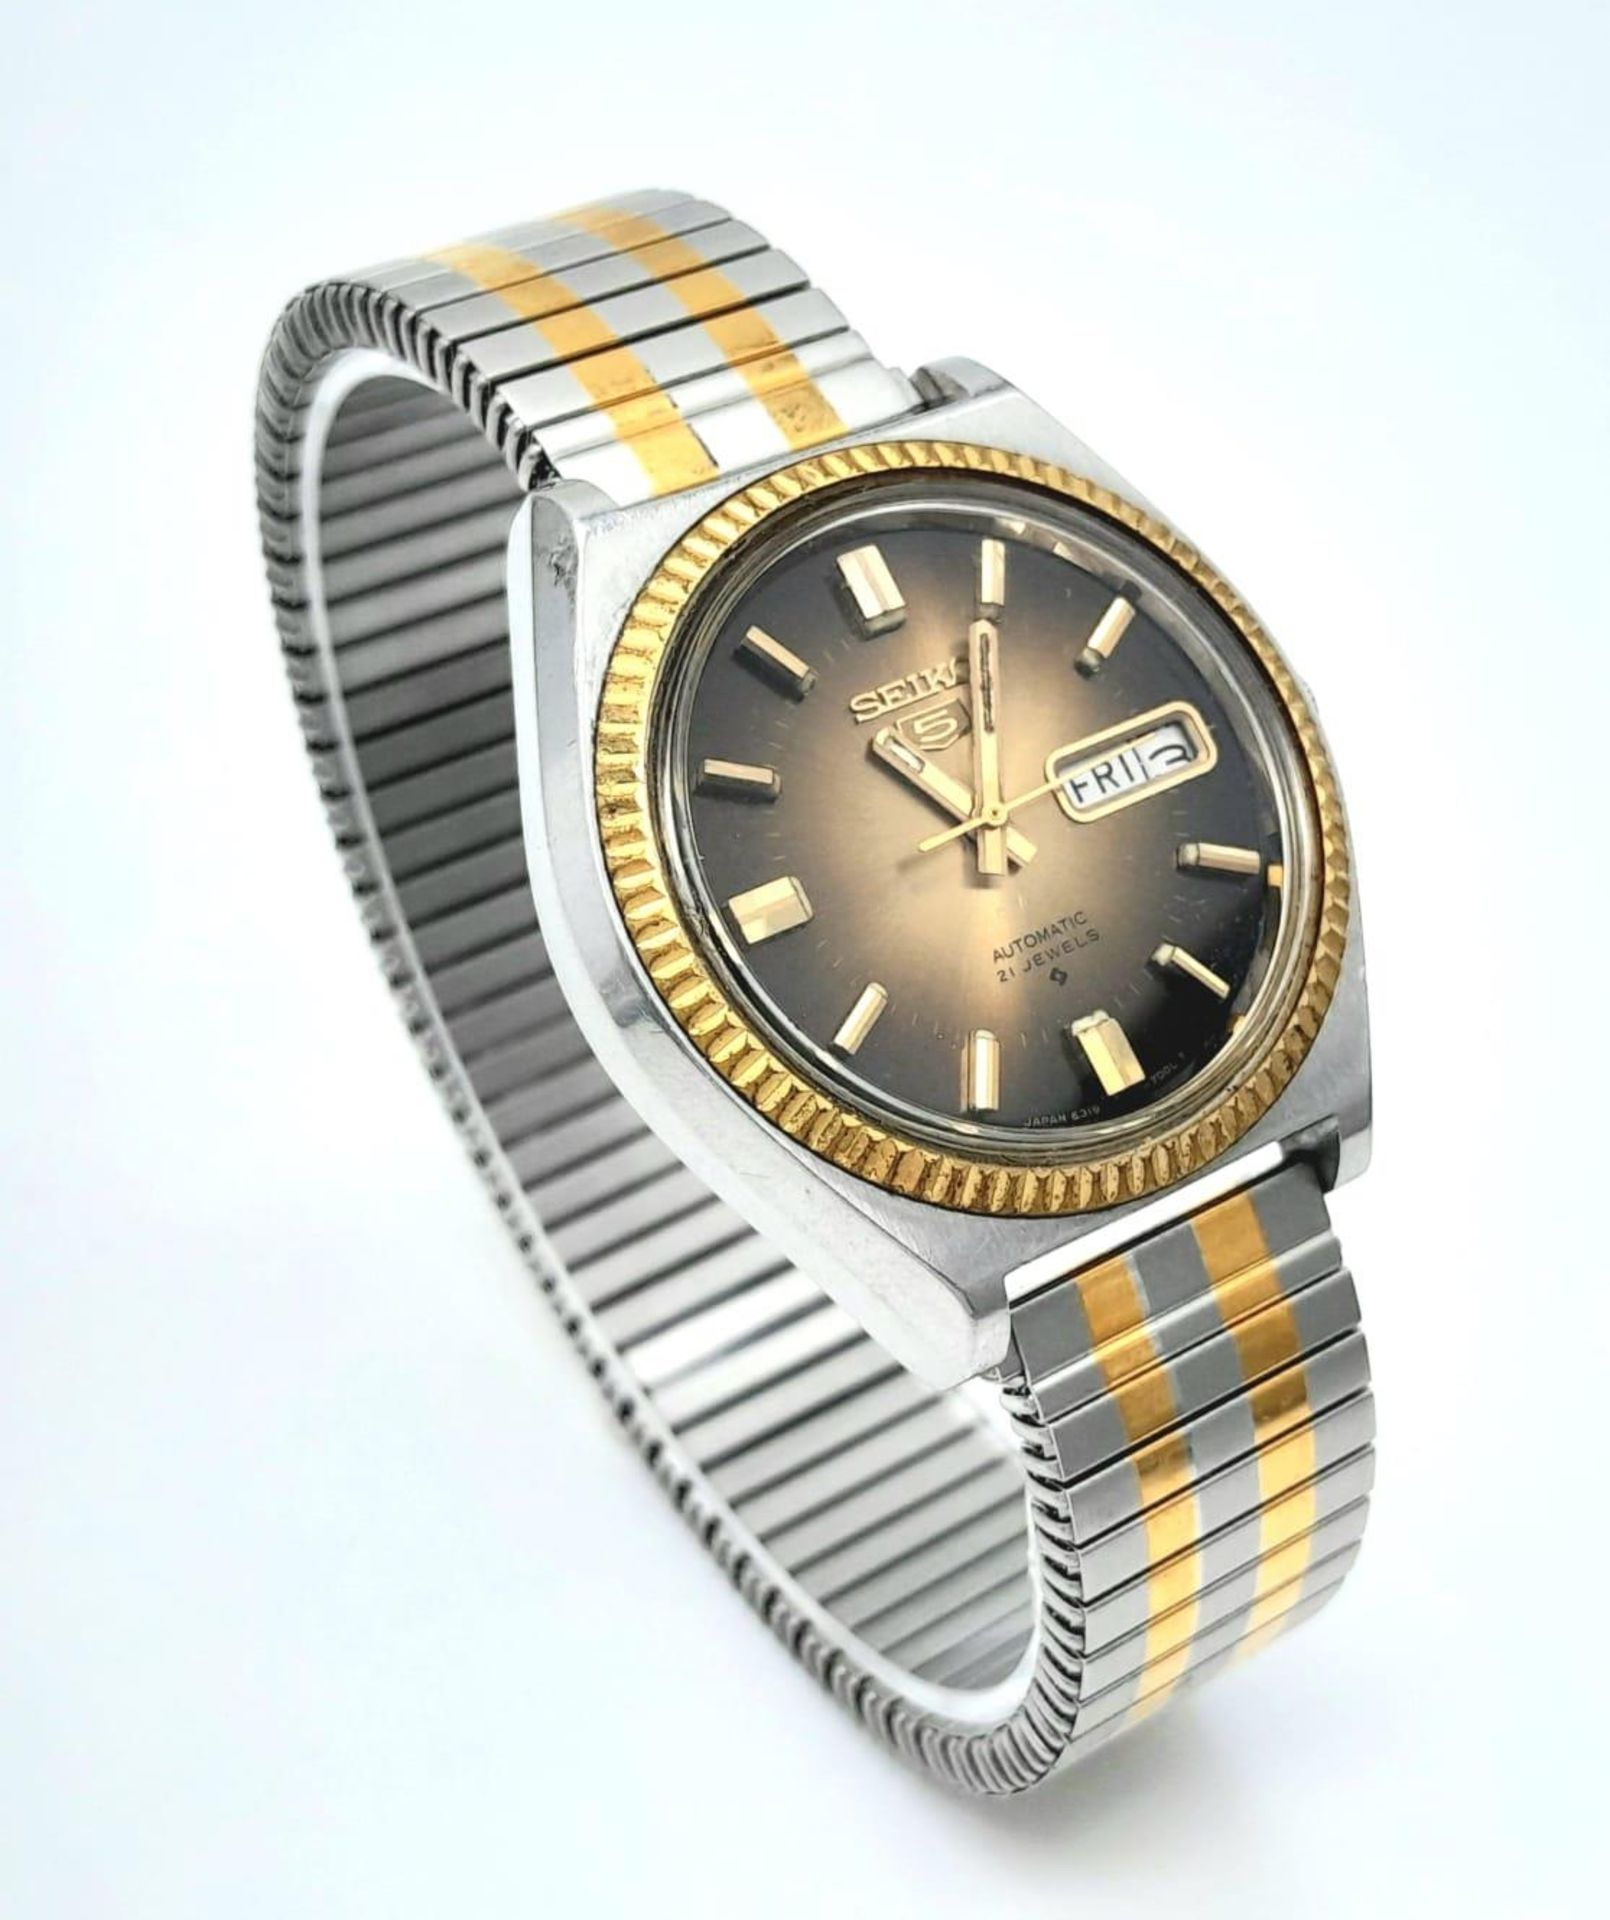 A Vintage Seiko 5 Automatic Gents Watch. Two tone stainless steel bracelet and case - 37mm. Metallic - Image 3 of 5